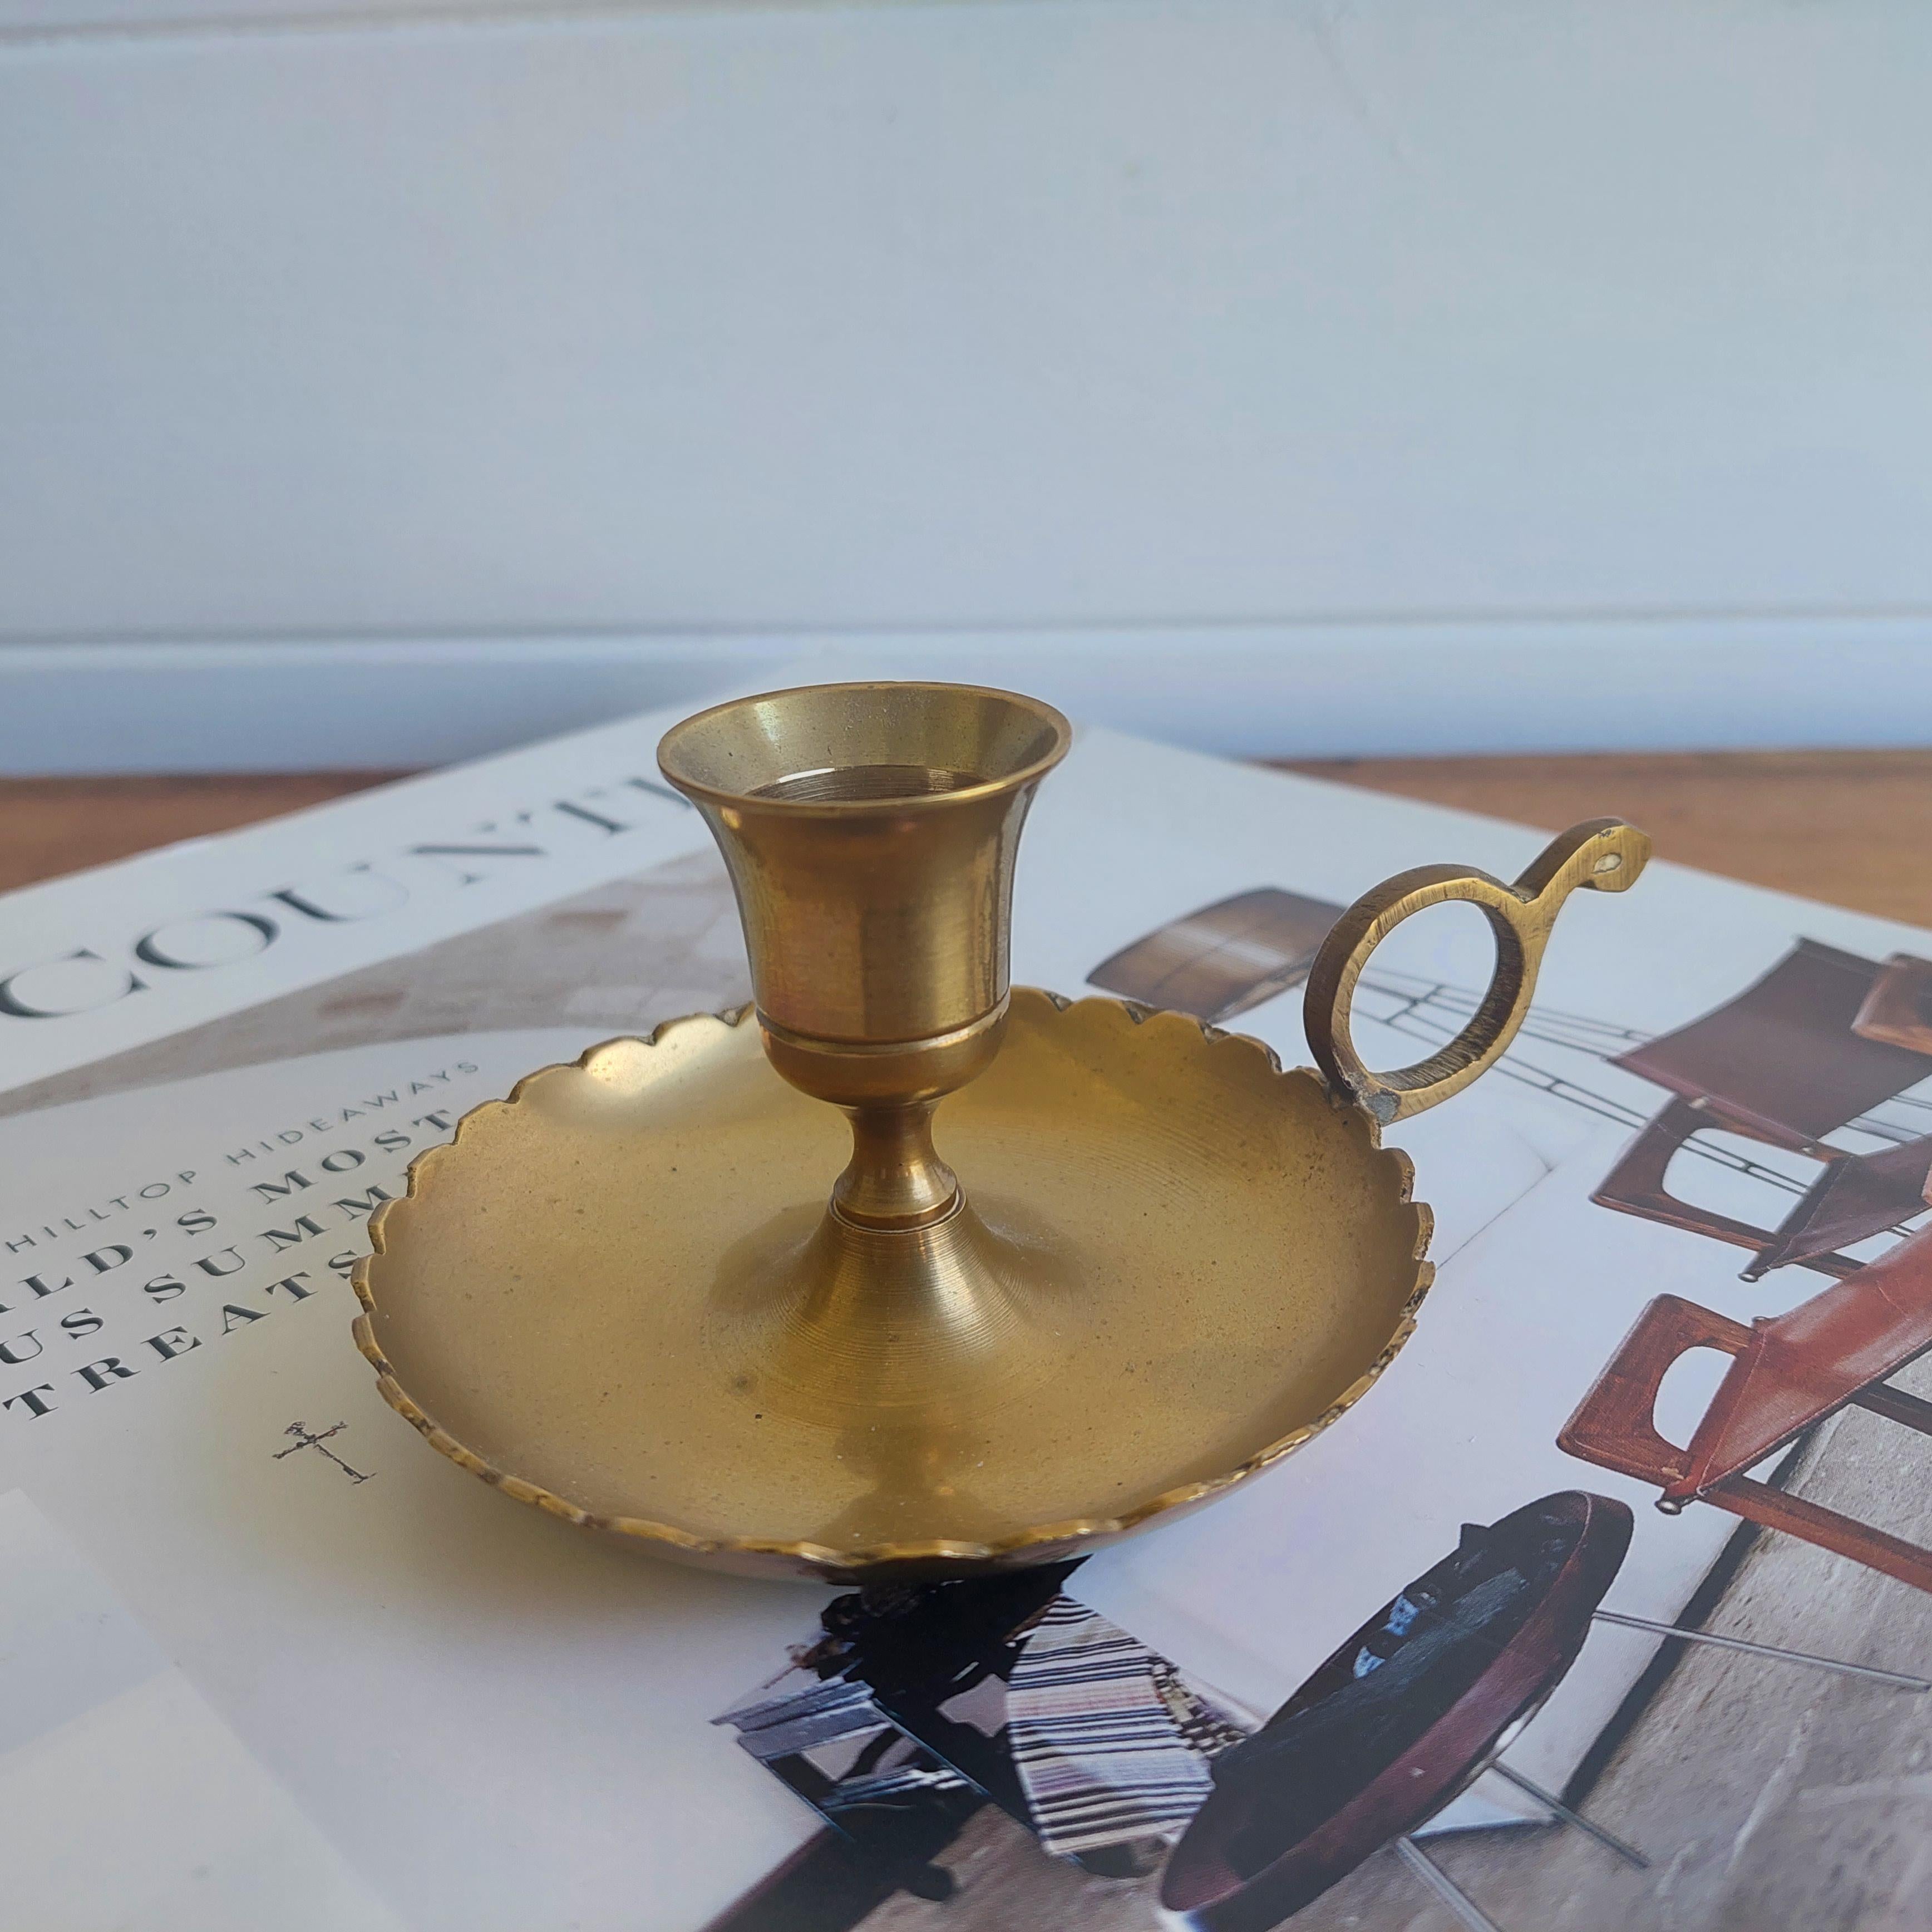 Lovely vintage brass candle holder (chamber stick) with scalloped rim.
Made in India

Vintage Brass Chamber Candlestick Holder - Finger Loop Handle - Scalloped Edge - 

Small brass candle holder with small cutted styled scalloped edge - a